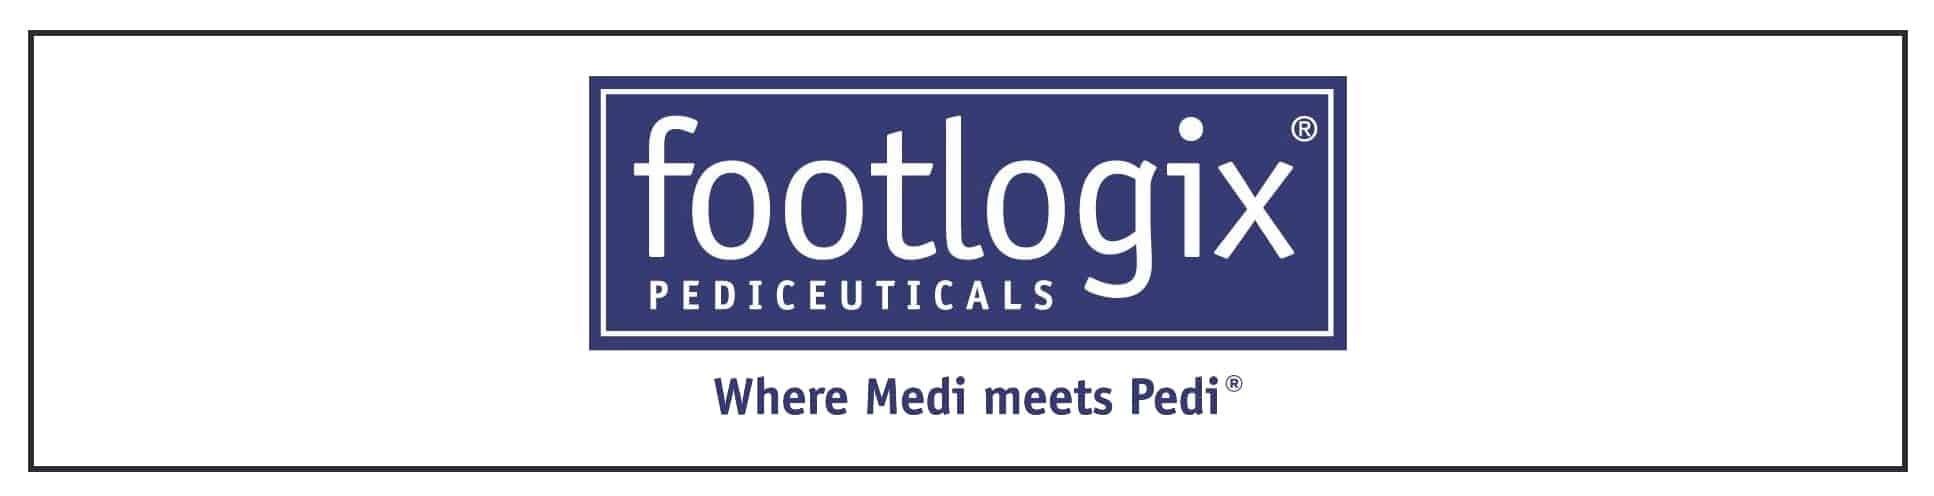 The logo for footlogix.